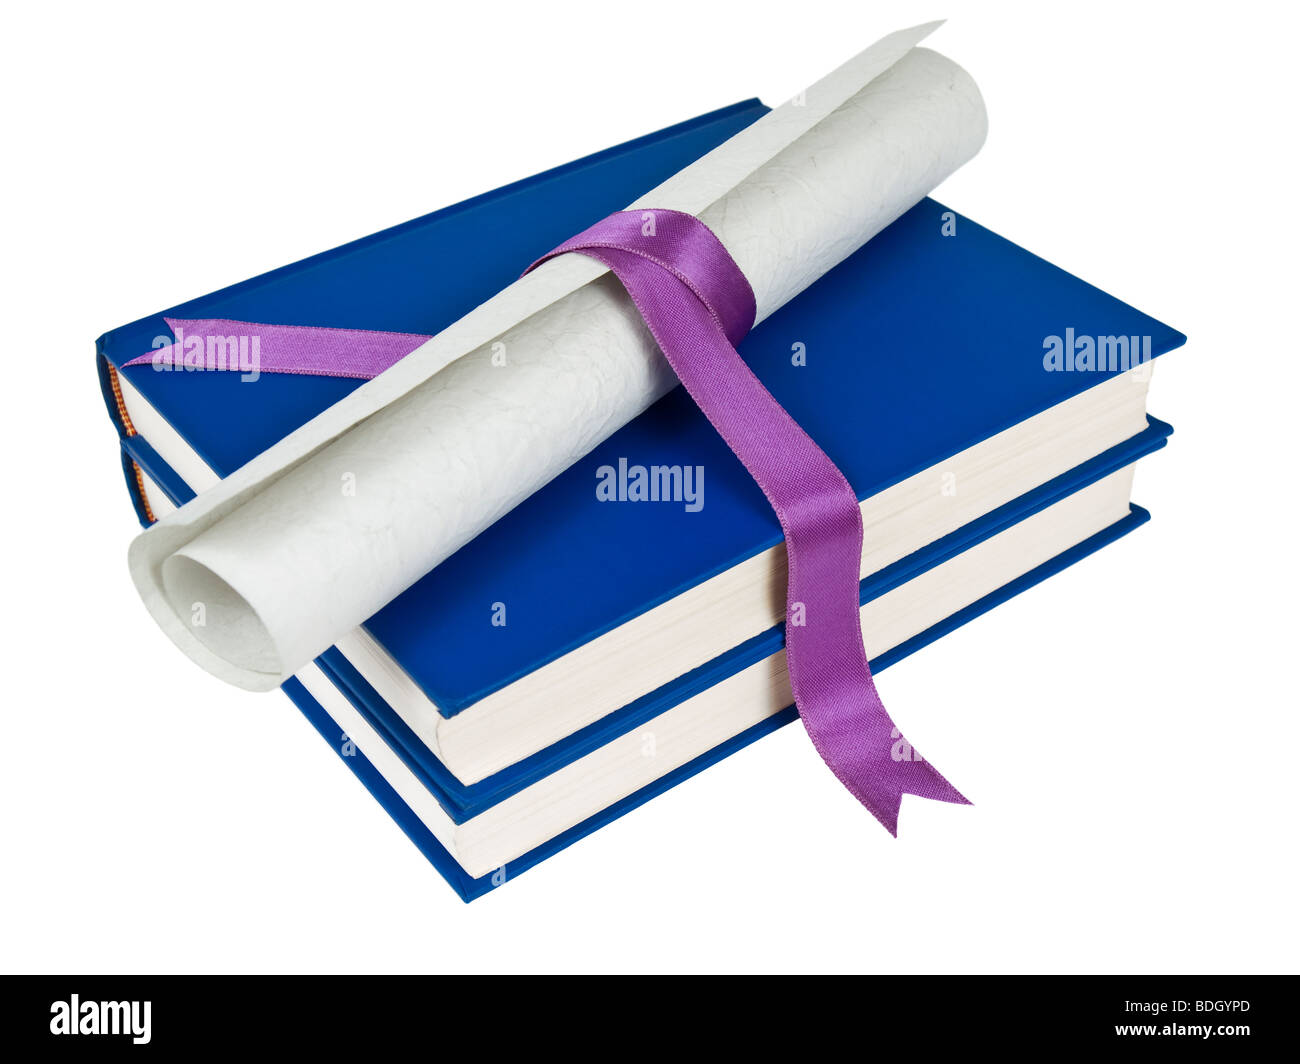 A diploma with violet ribbon over blue books. Isolated on white. Stock Photo